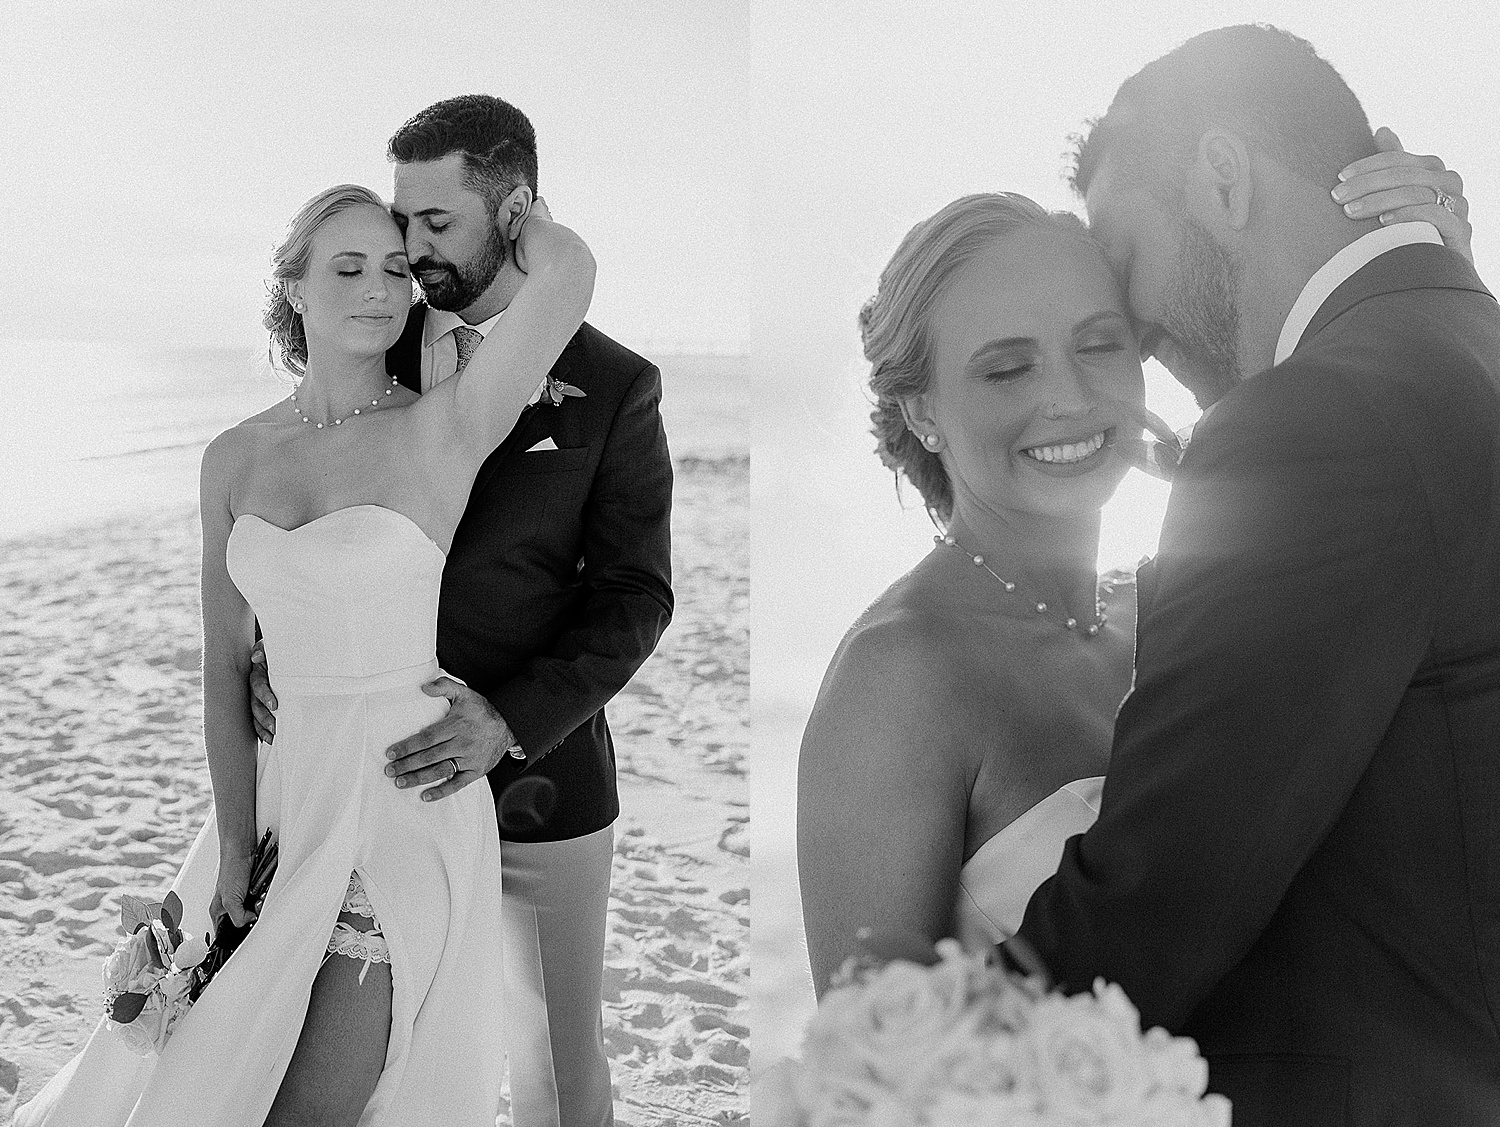 Bride and groom wrapped into each other's arms after wedding ceremony on beach